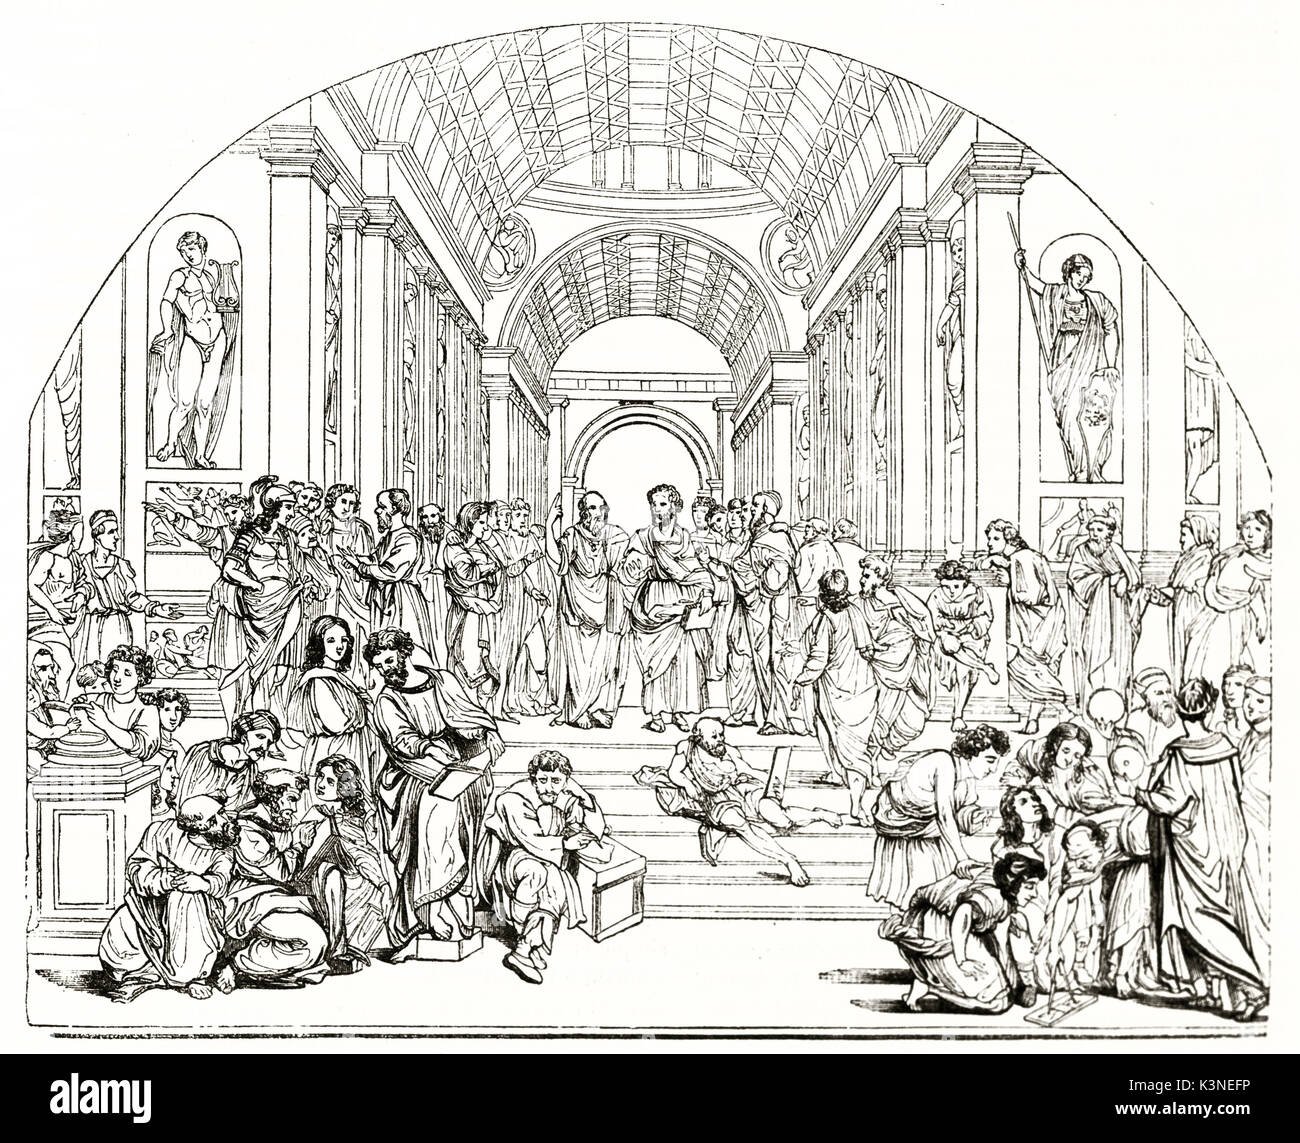 Ancient greek people in a large hall wearing tunics. Old engraved reproduction of The School of Athens Renaissance fresco in the Apostolic Palace Vatican city. Magasin Pittoresque Paris 1839 Stock Photo